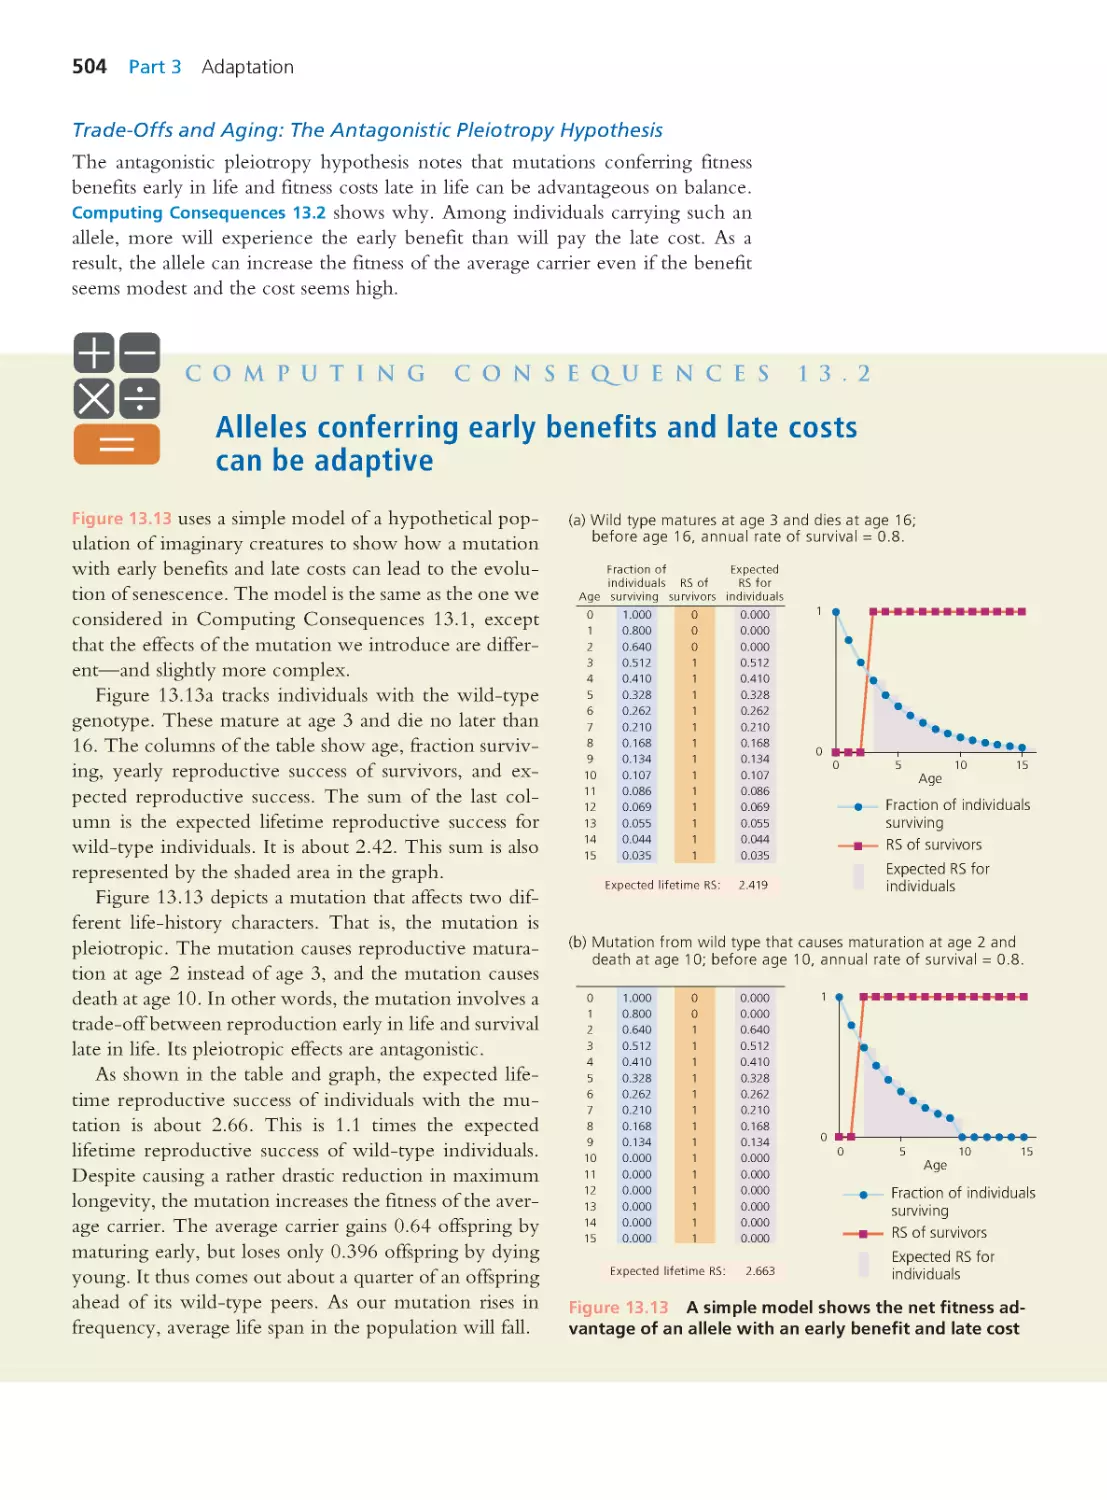 Computing Consequences 13.2 Alleles conferring early benefits and late costs can be adaptive